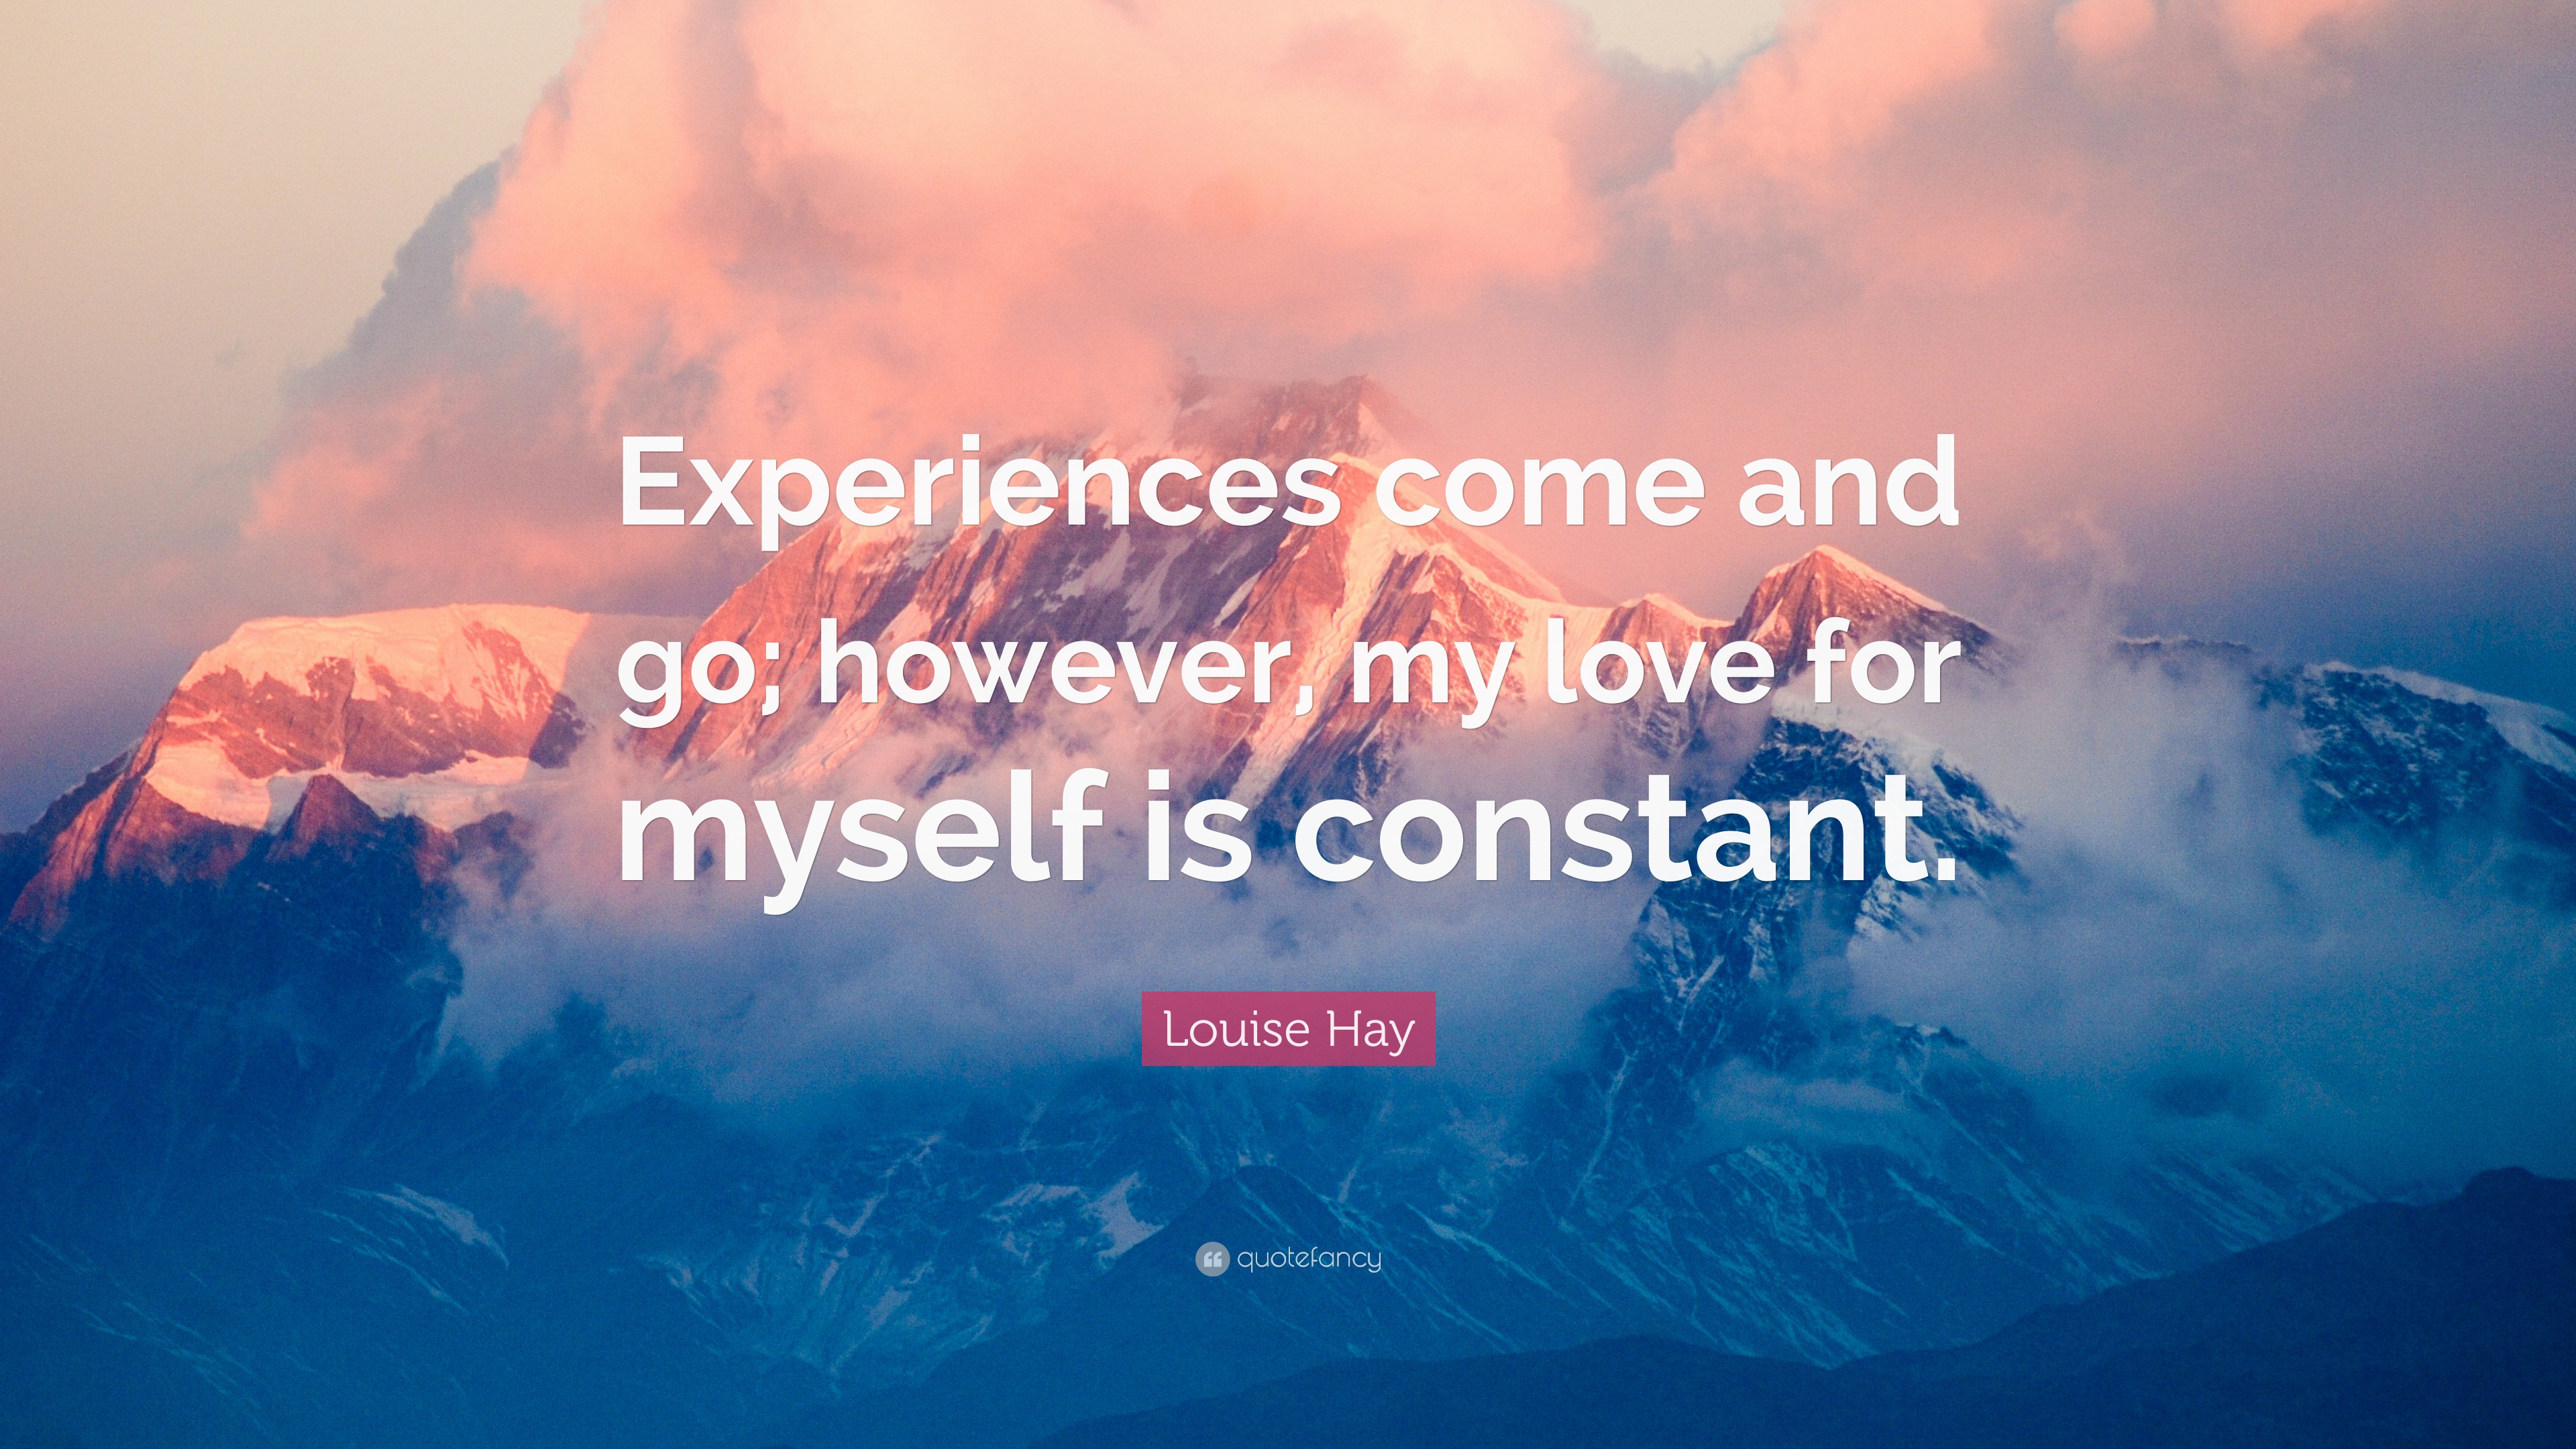 Louise Hay Quote: “Experiences come and go; however, my love for myself is  constant.”